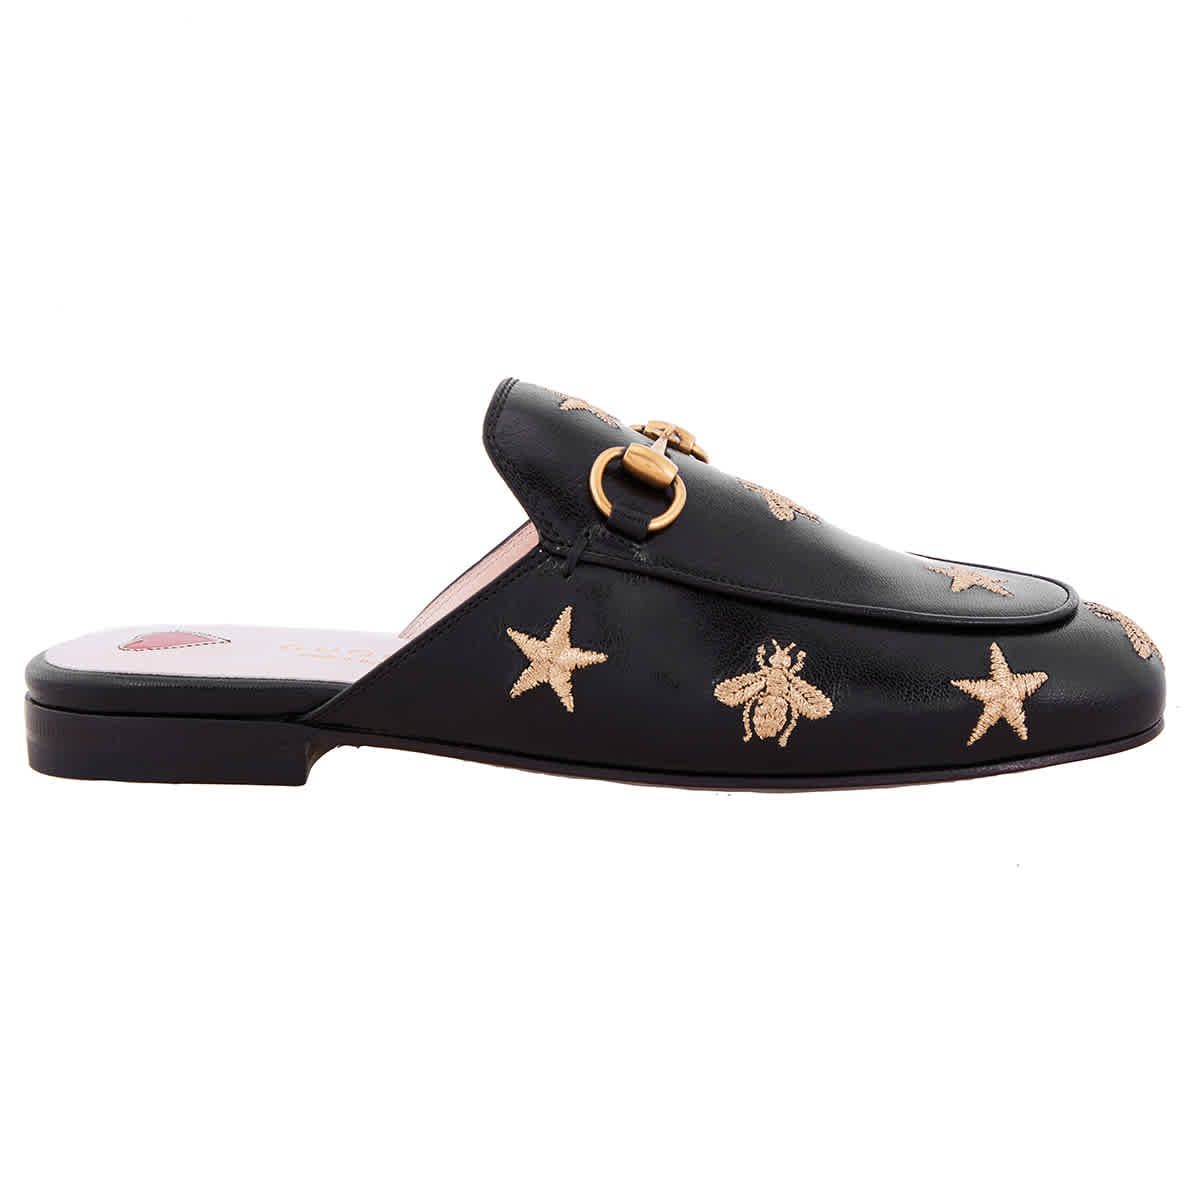 Gucci Princetown Embroidered Leather Slipper